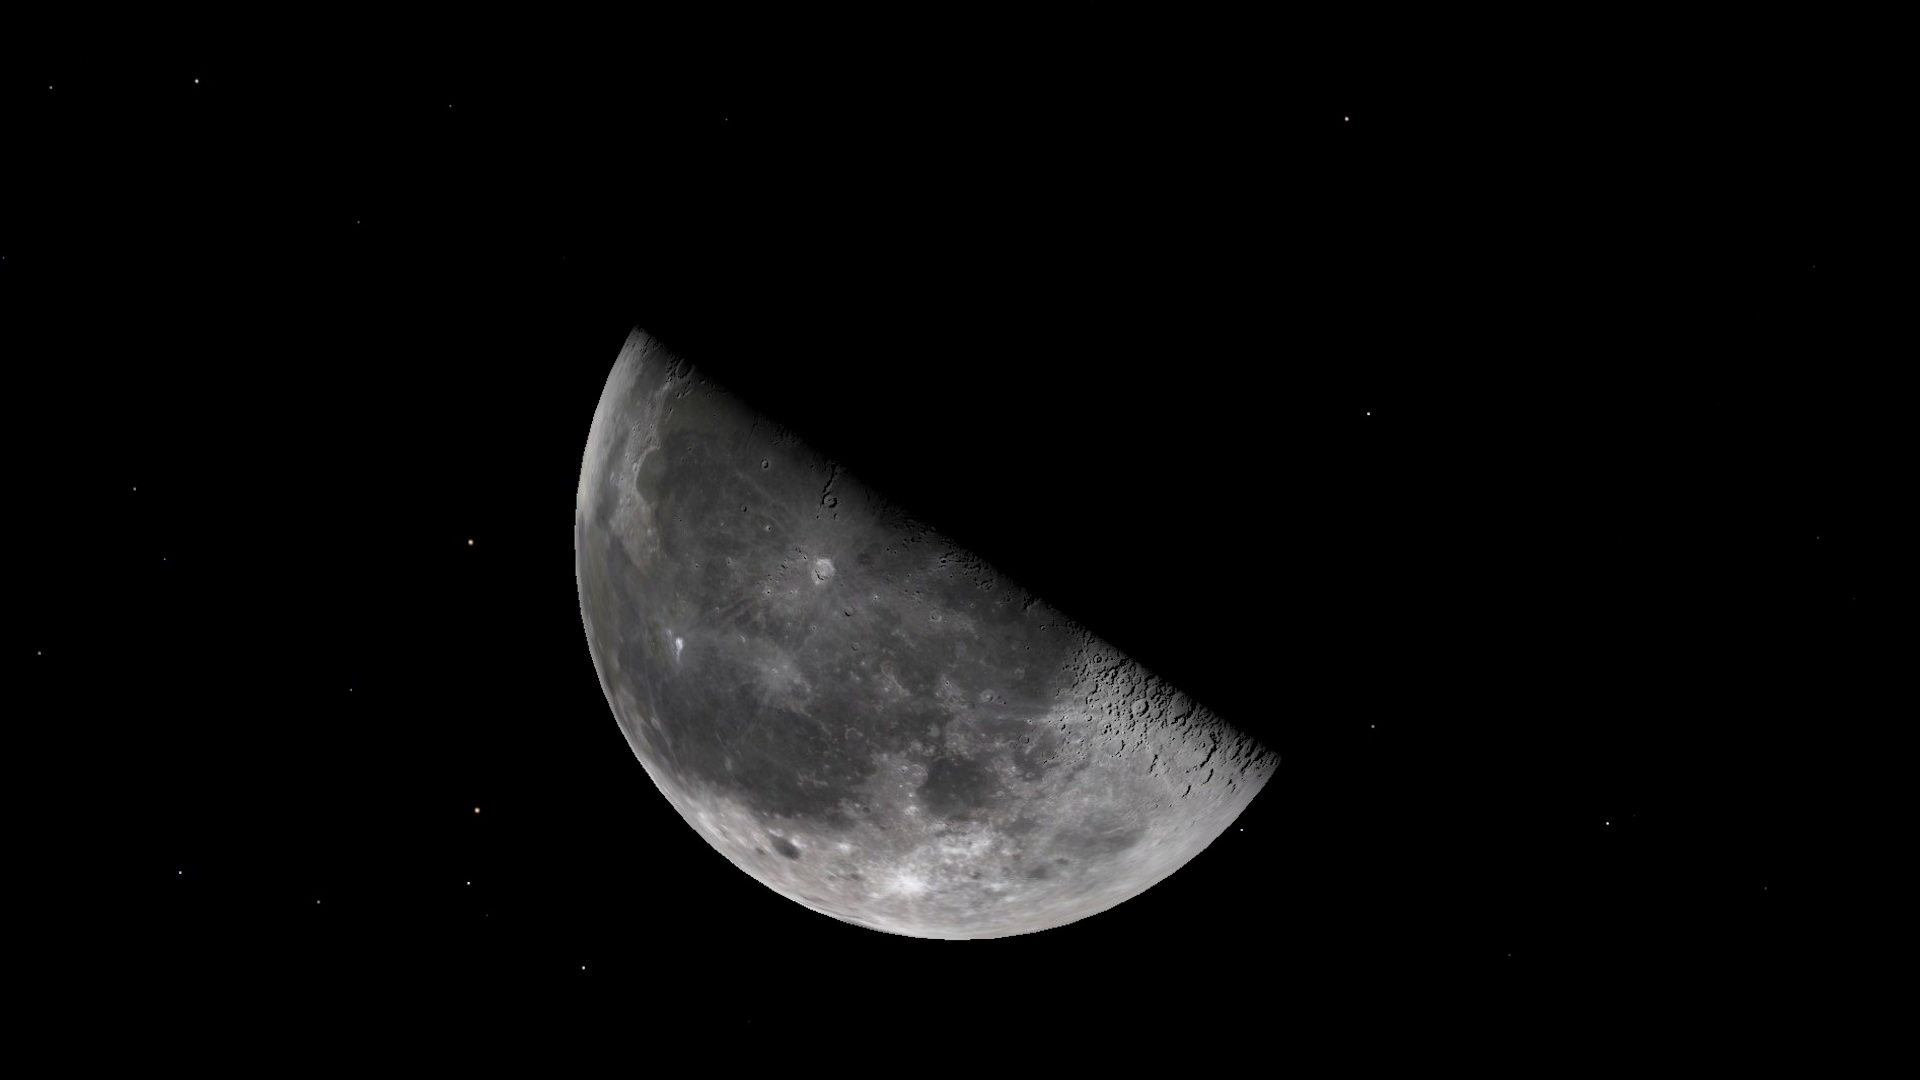 An illustration of the third quarter moon as it will appear on December 16.